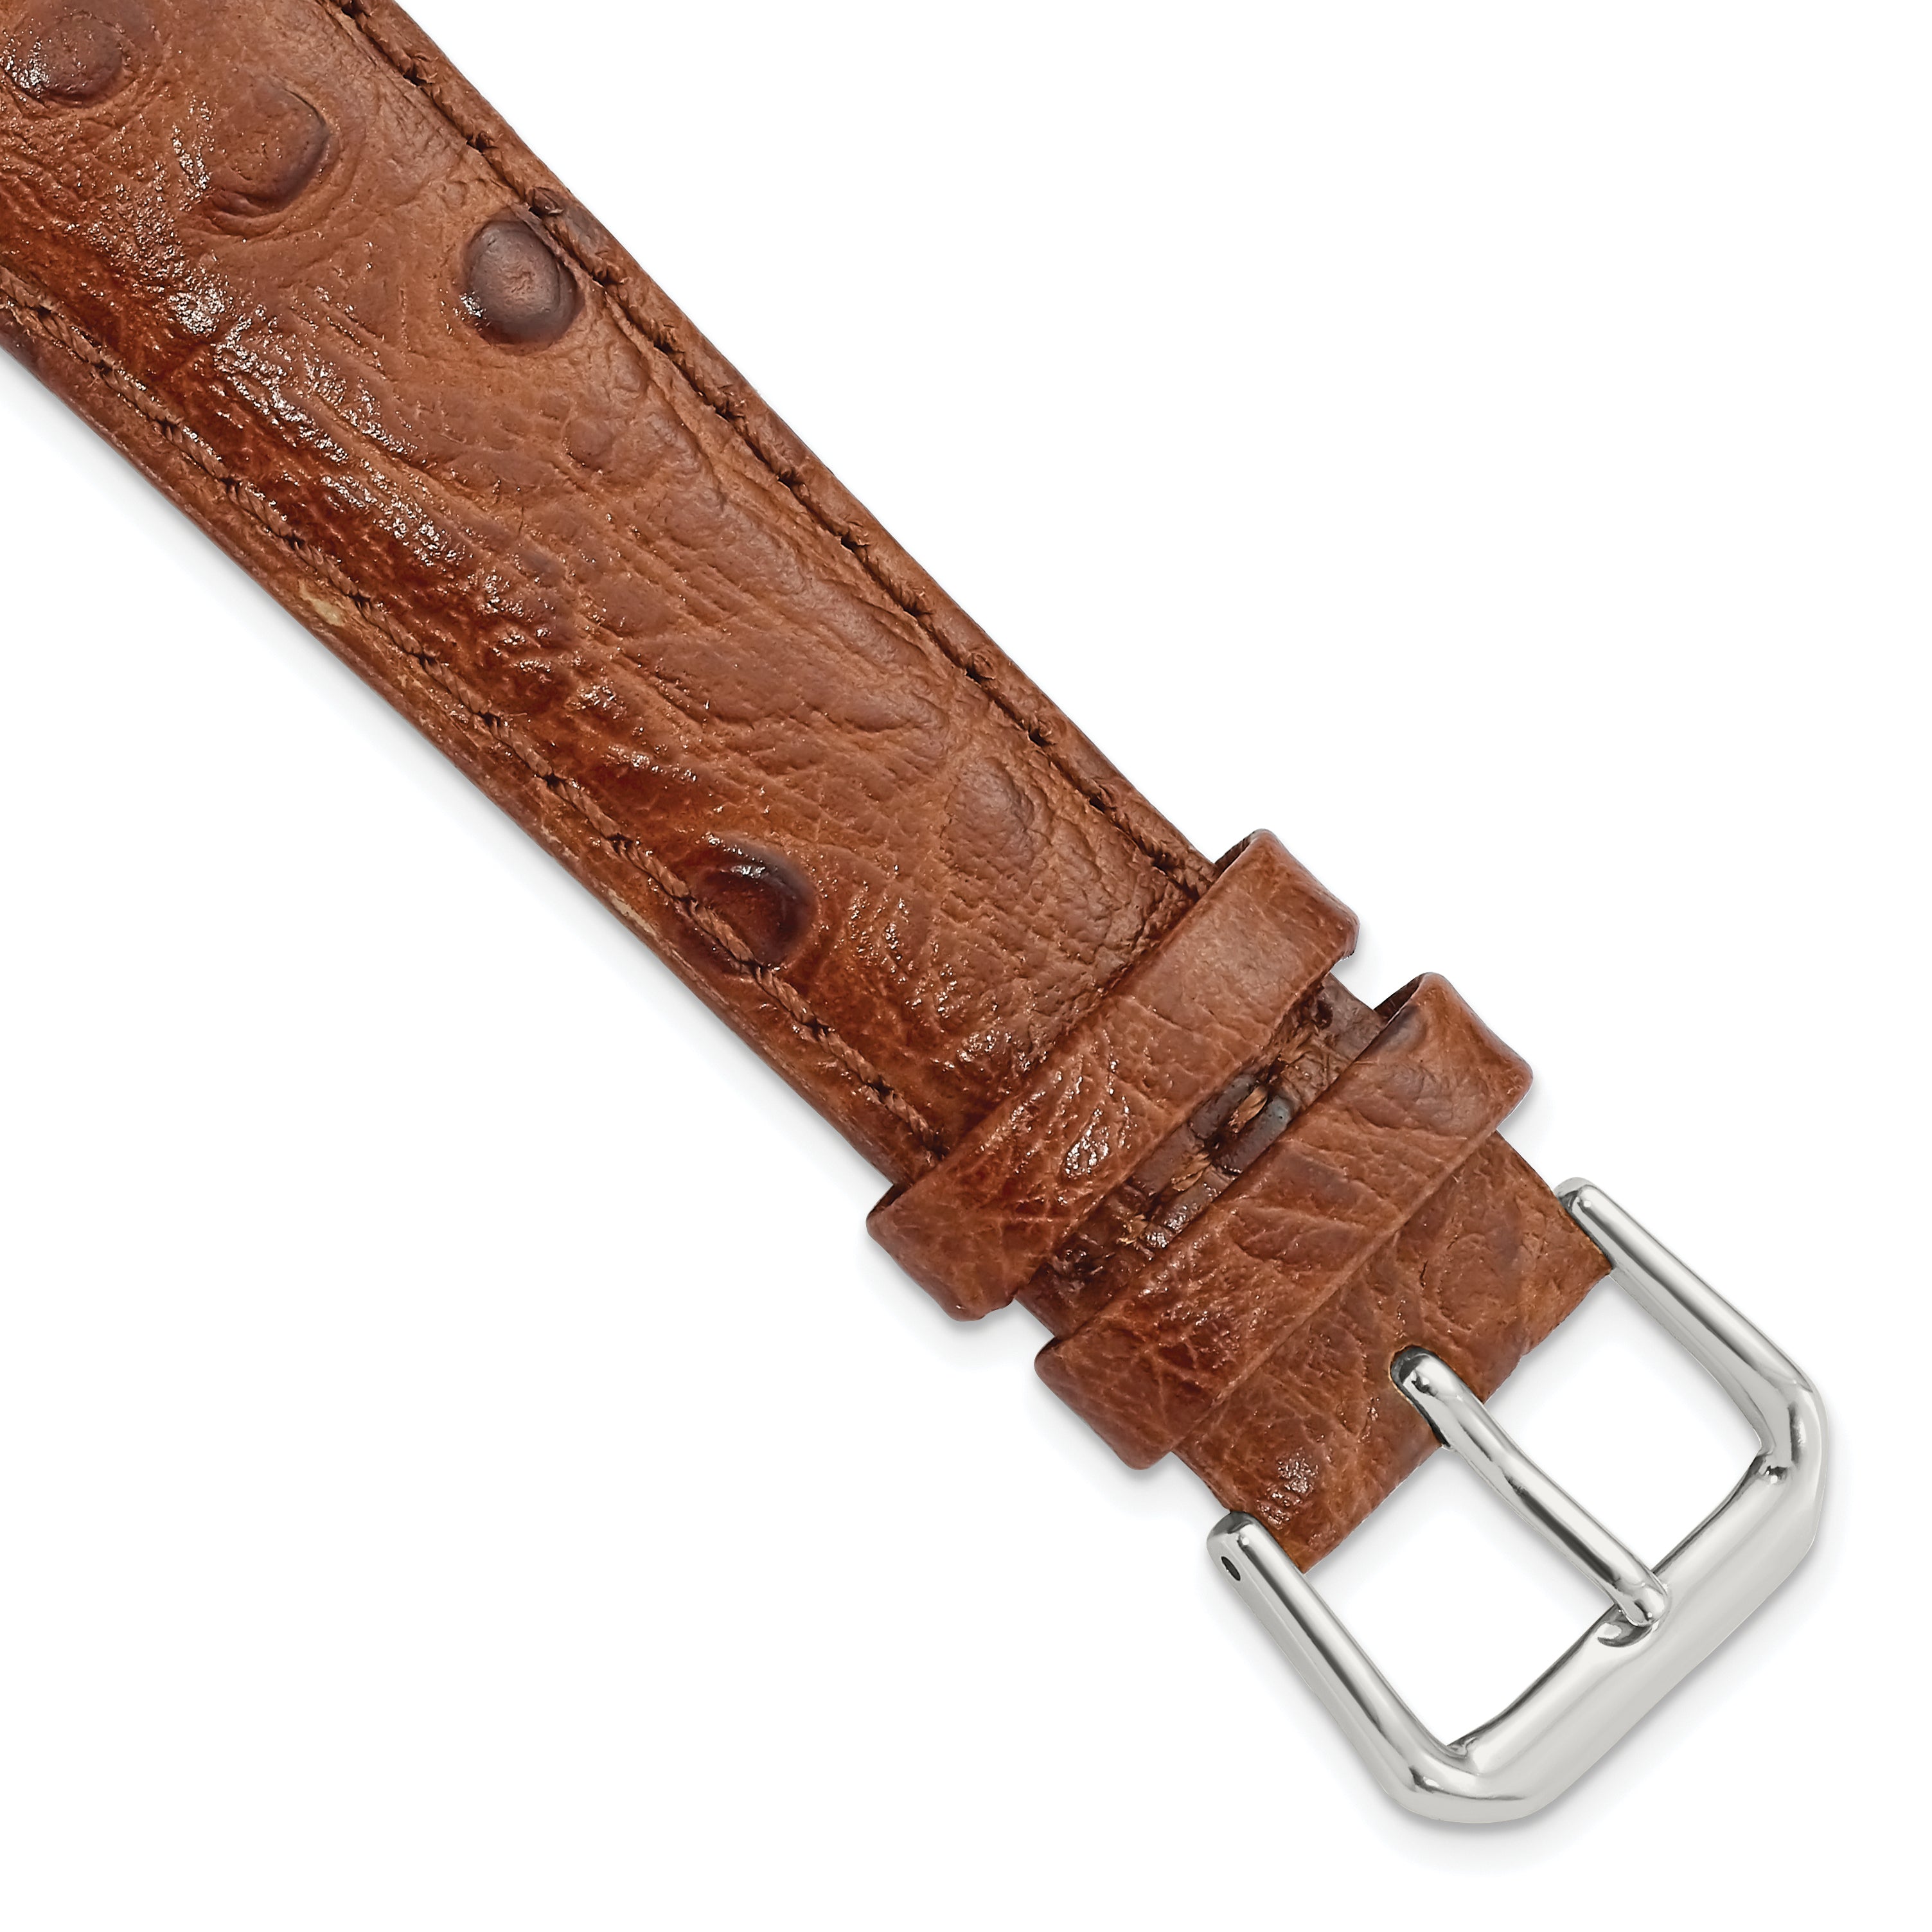 DeBeer 19mm Havana Ostrich Grain Leather with Silver-tone Buckle 7.5 inch Watch Band